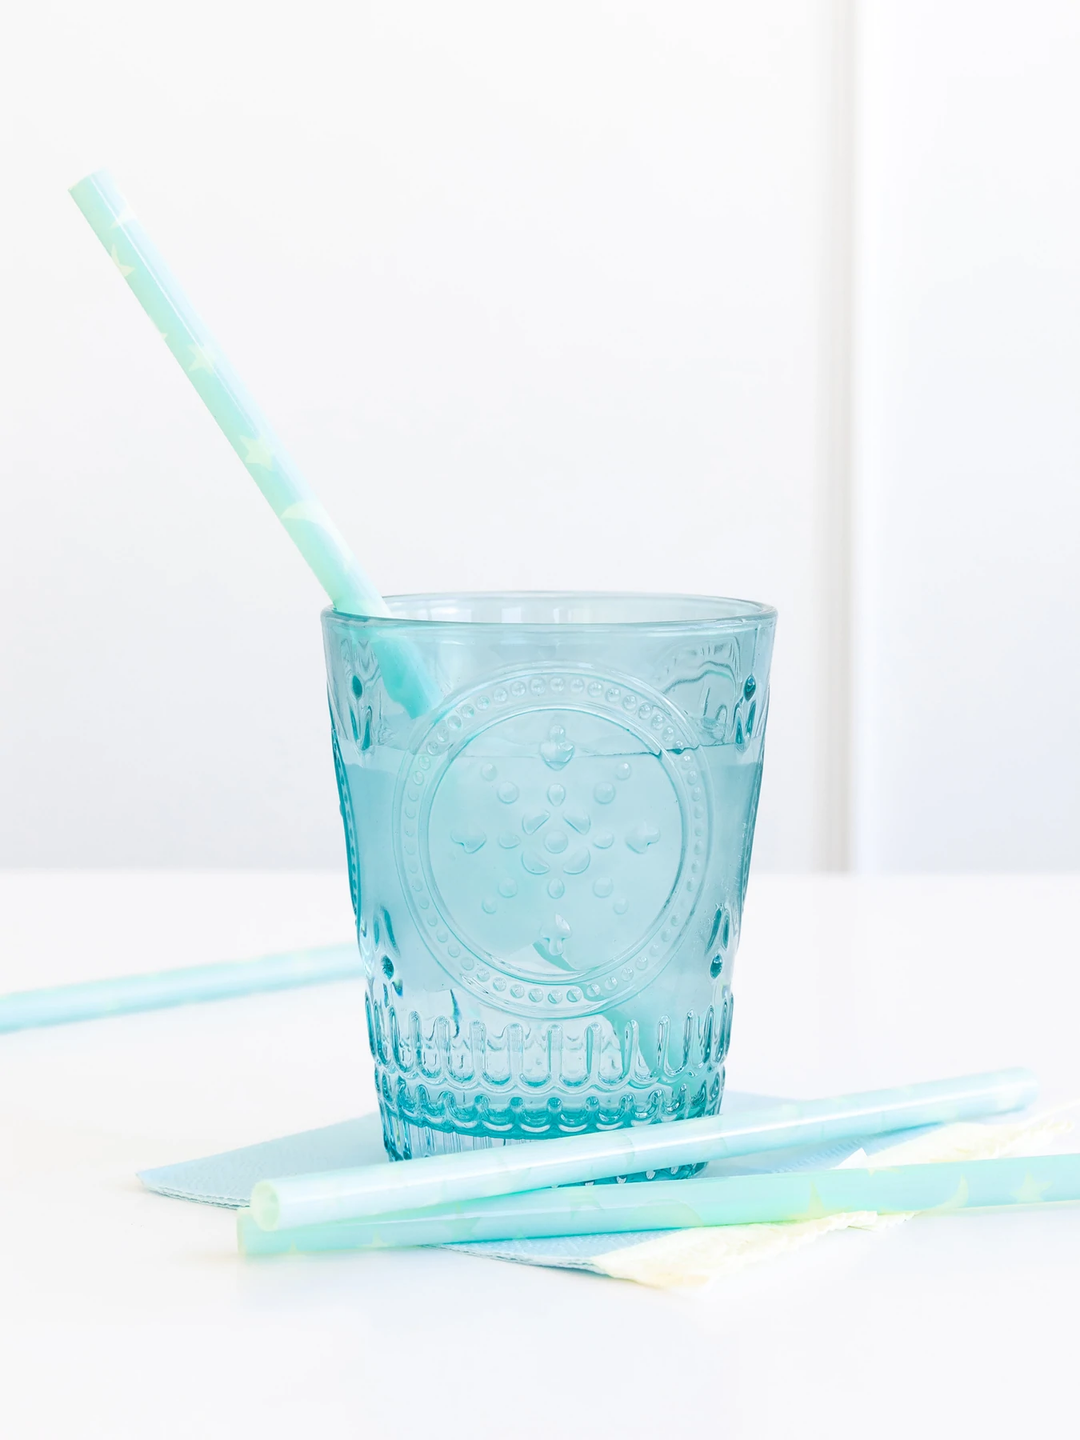 BABY BLUE REUSABLE STRAWS My Mind's Eye STRAWS Bonjour Fete - Party Supplies